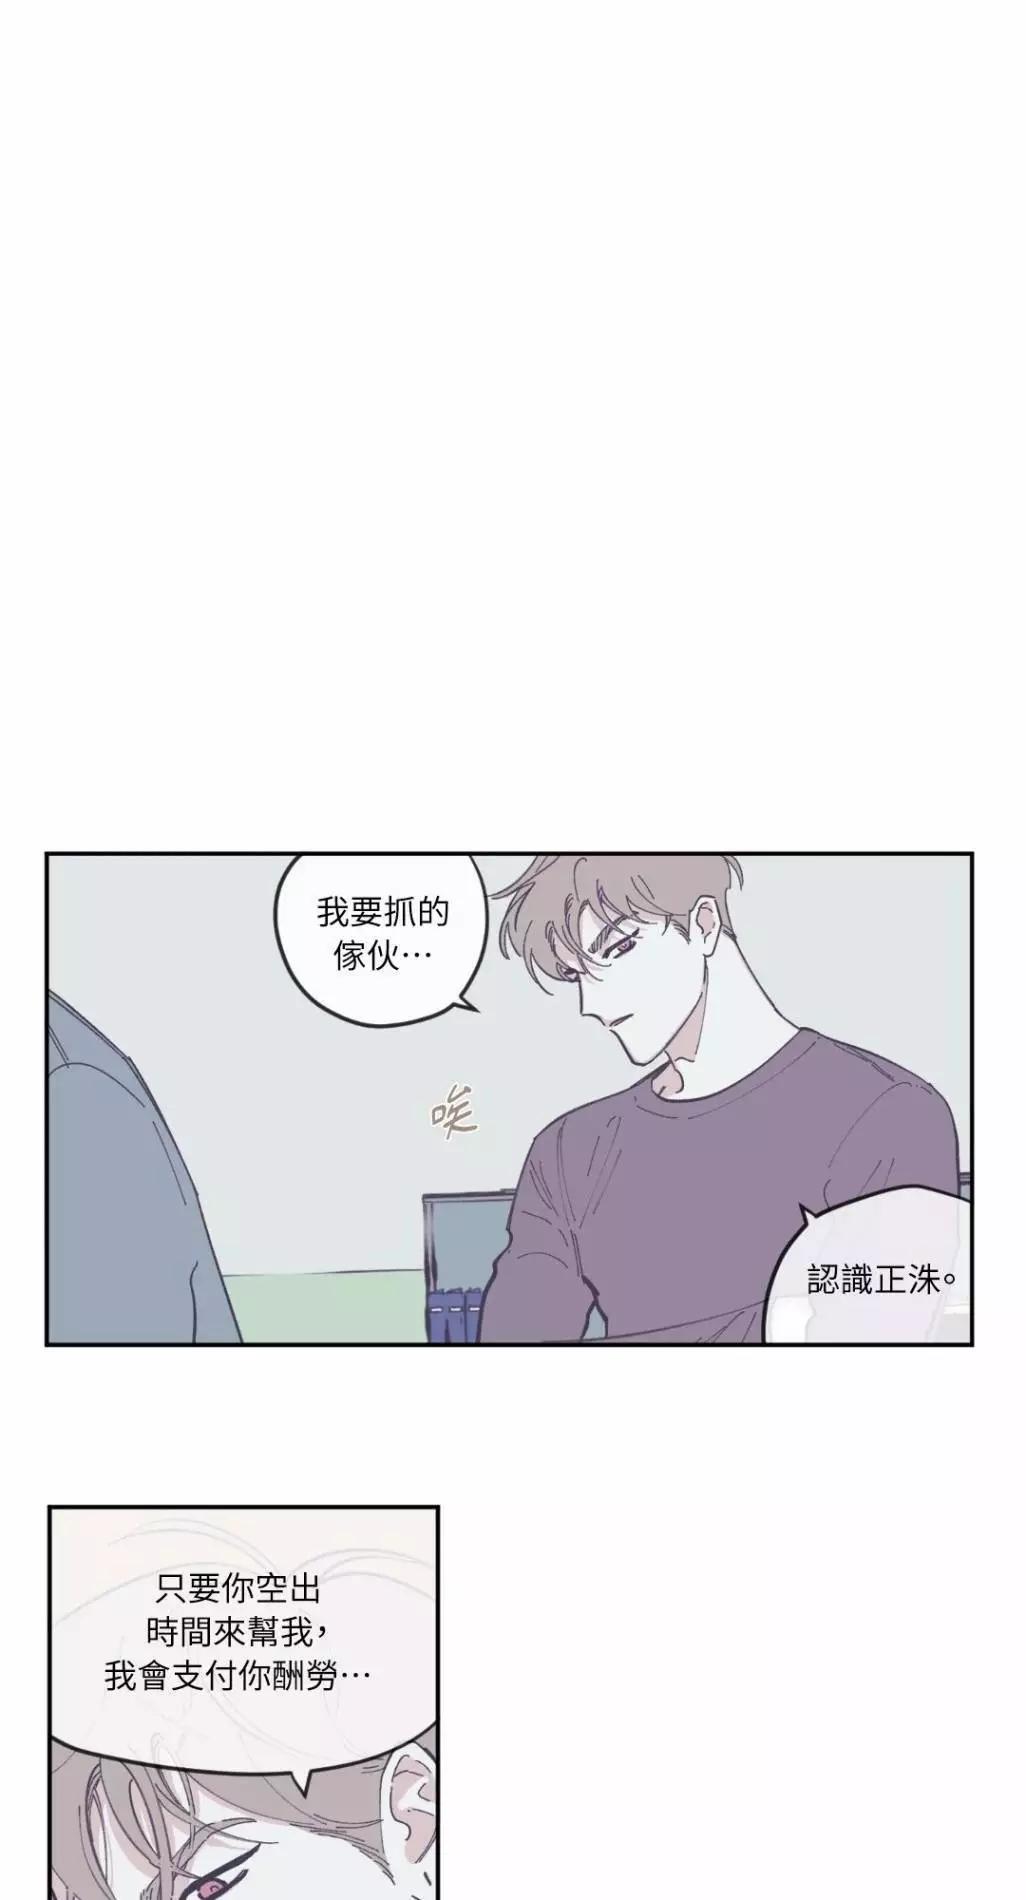 Clean Up百分百 - 第67話 - 5